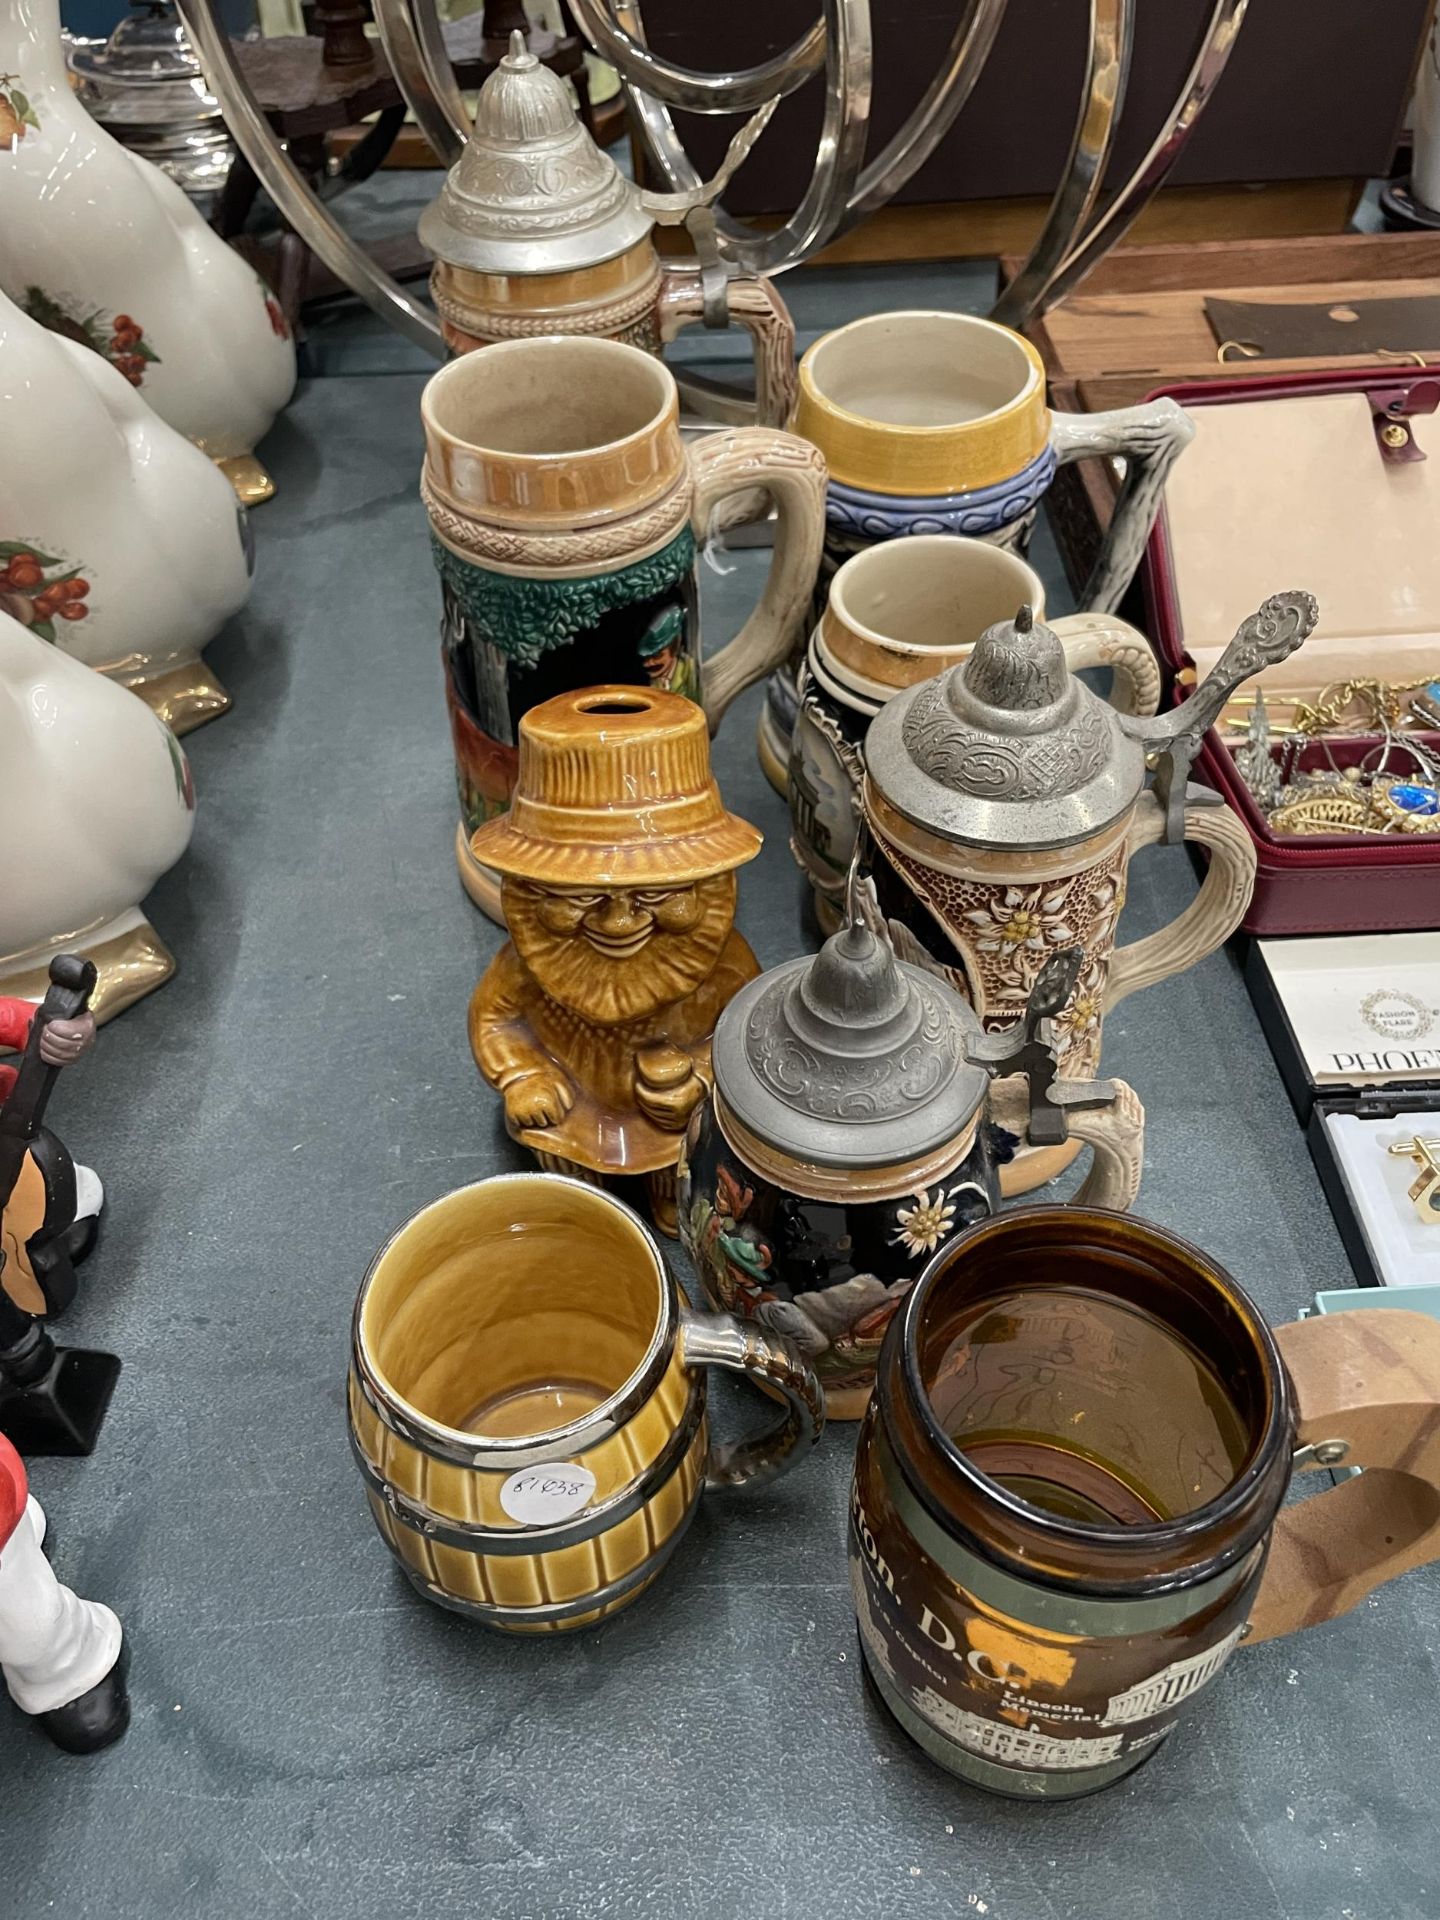 A COLLECTION OF VINTAGE STEIN TANKARDS, ETC - 9 IN TOTAL